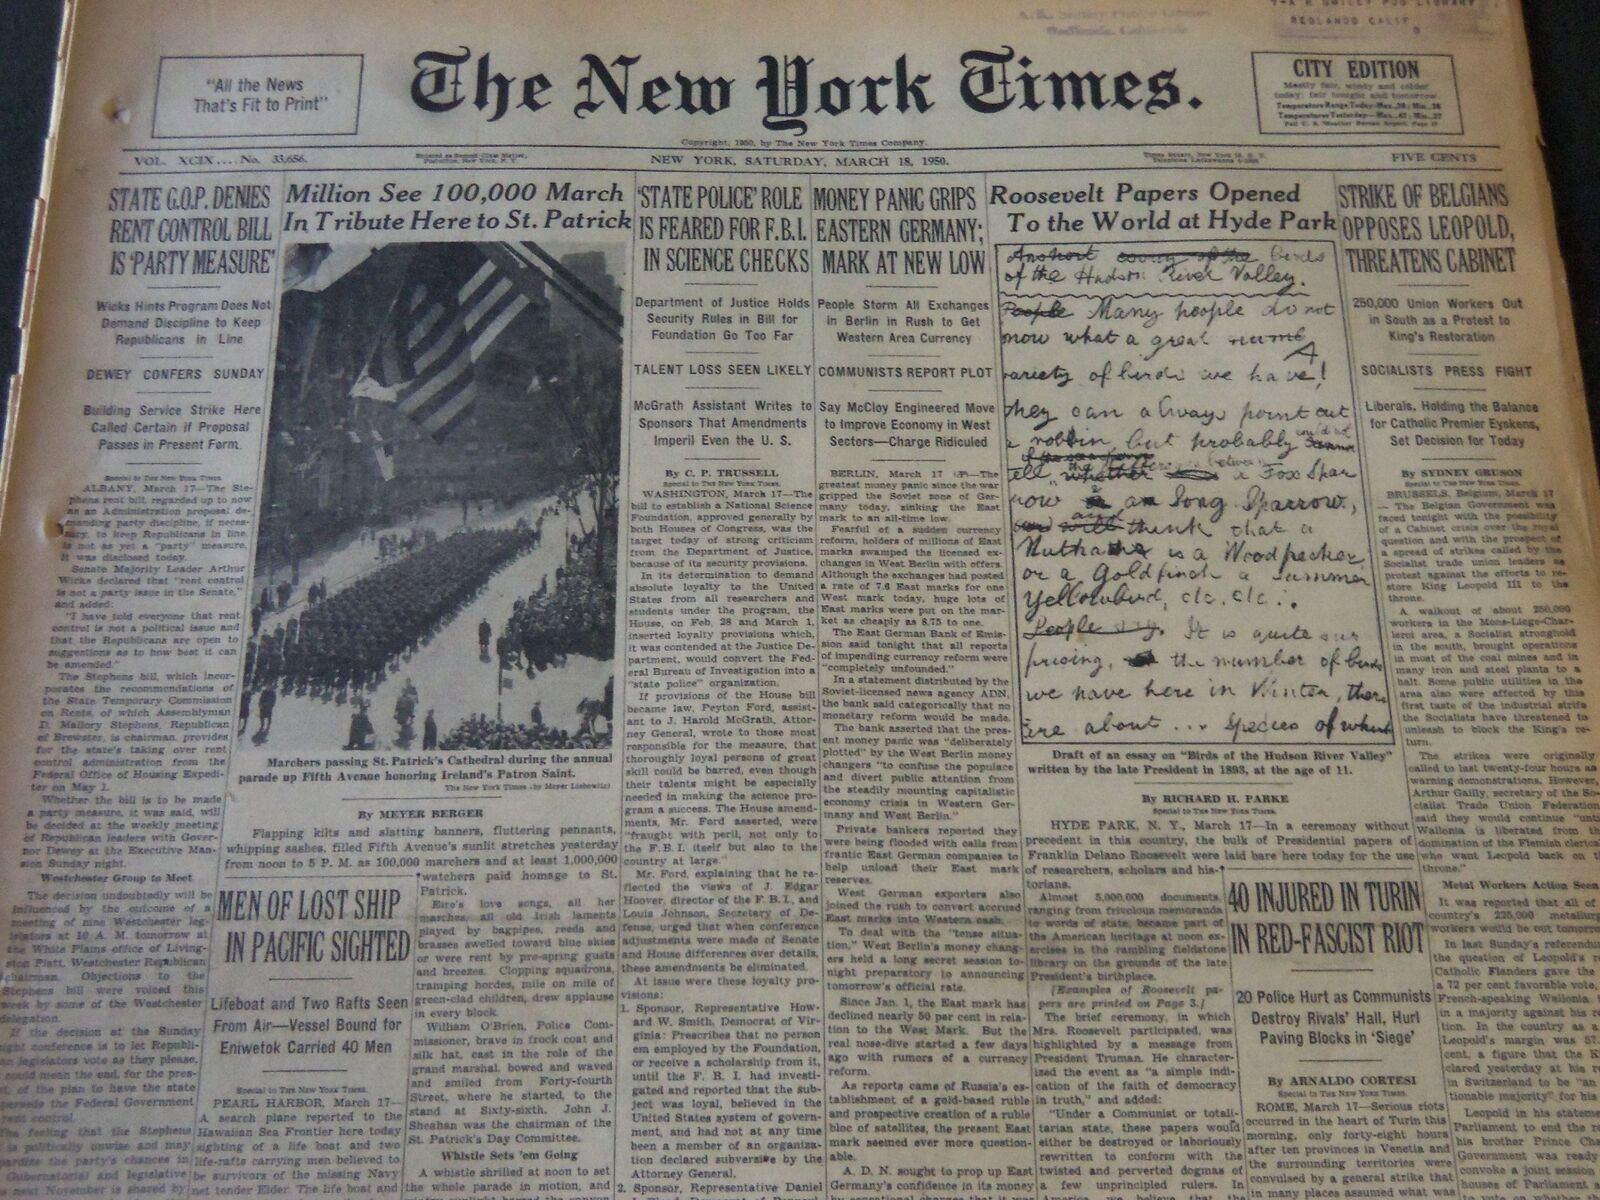 1950 MARCH 18 NEW YORK TIMES - ROOSEVELT PAPERS OPENED AT HYDE PARK - NT 5970